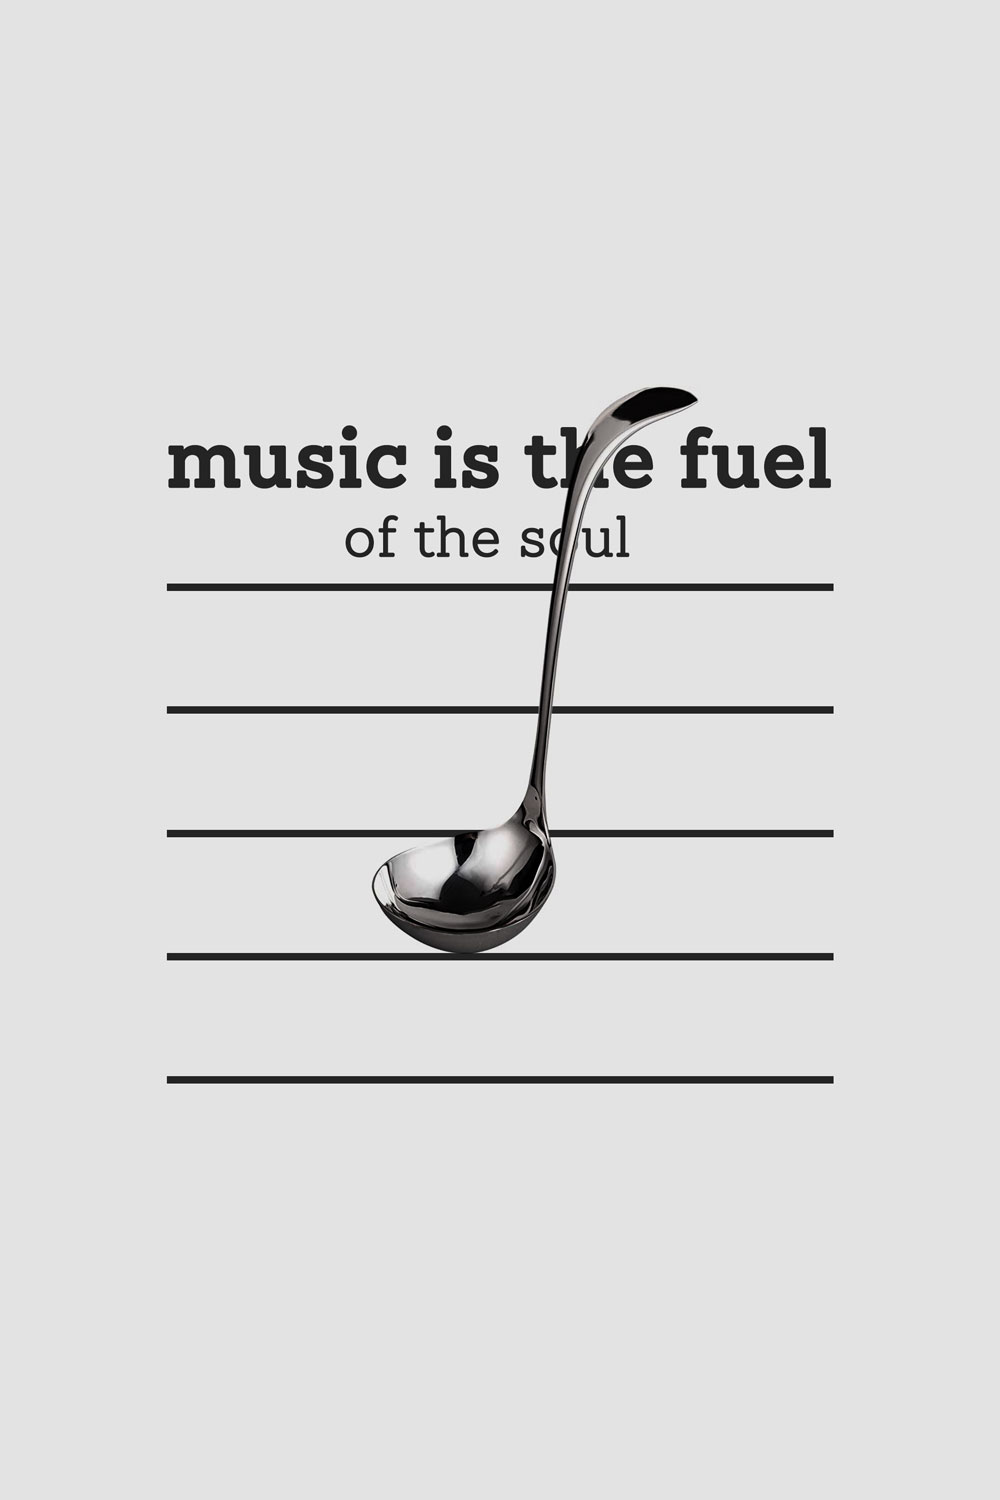 music-is-the-fuel-of-the-soul-poster